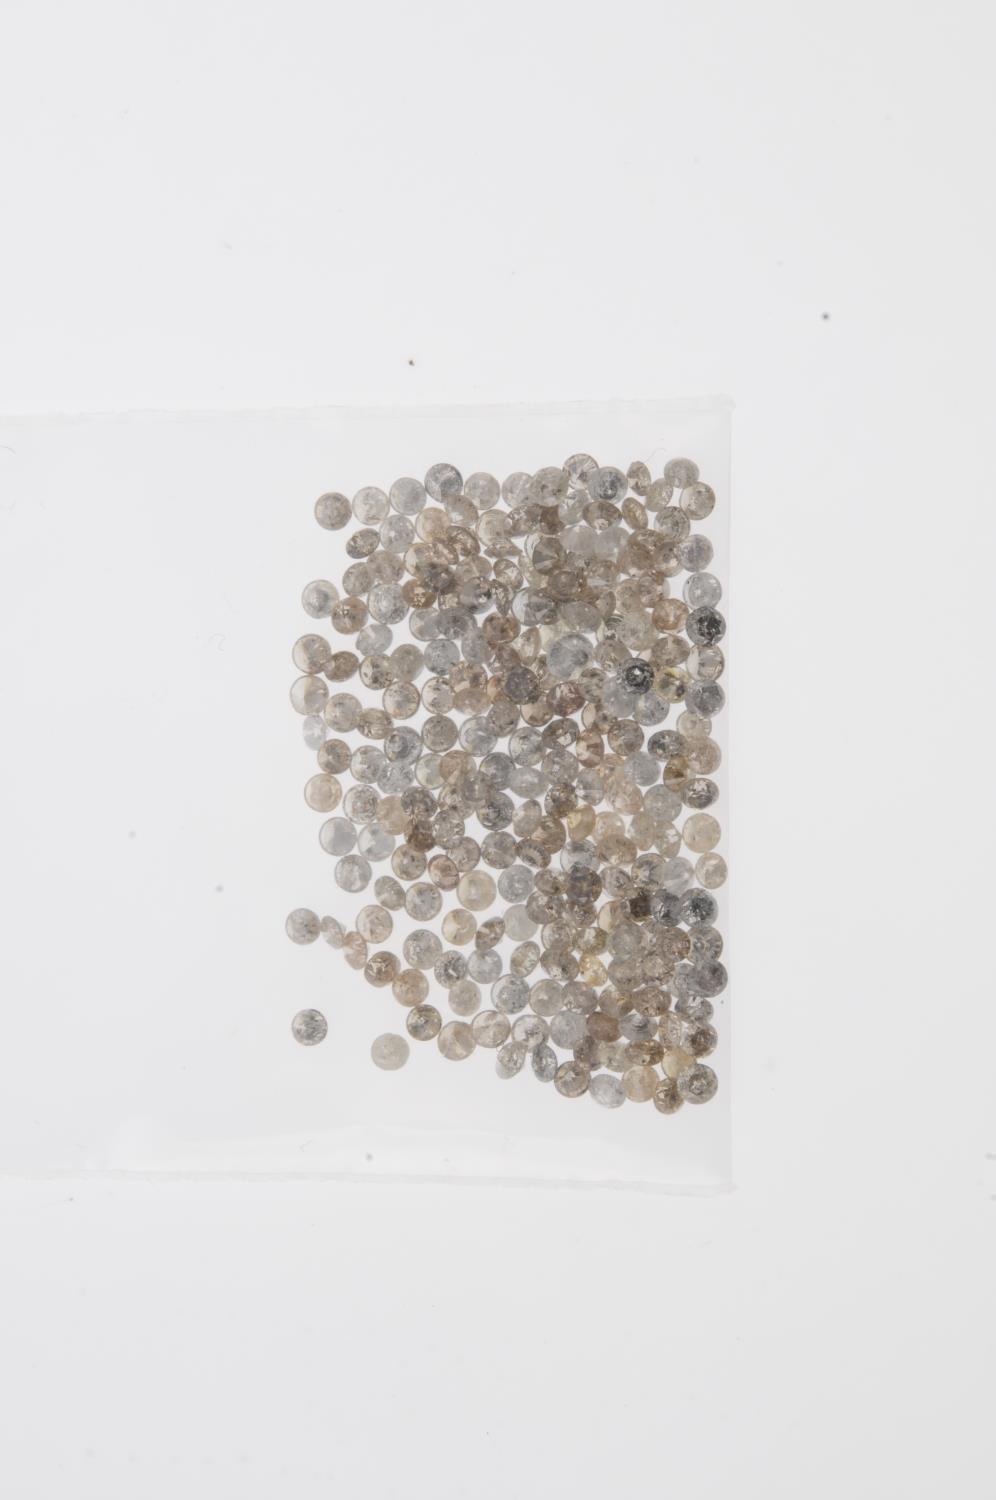 A small selection of round brilliant-cut diamonds and 'brown' melee diamonds. - Image 2 of 2